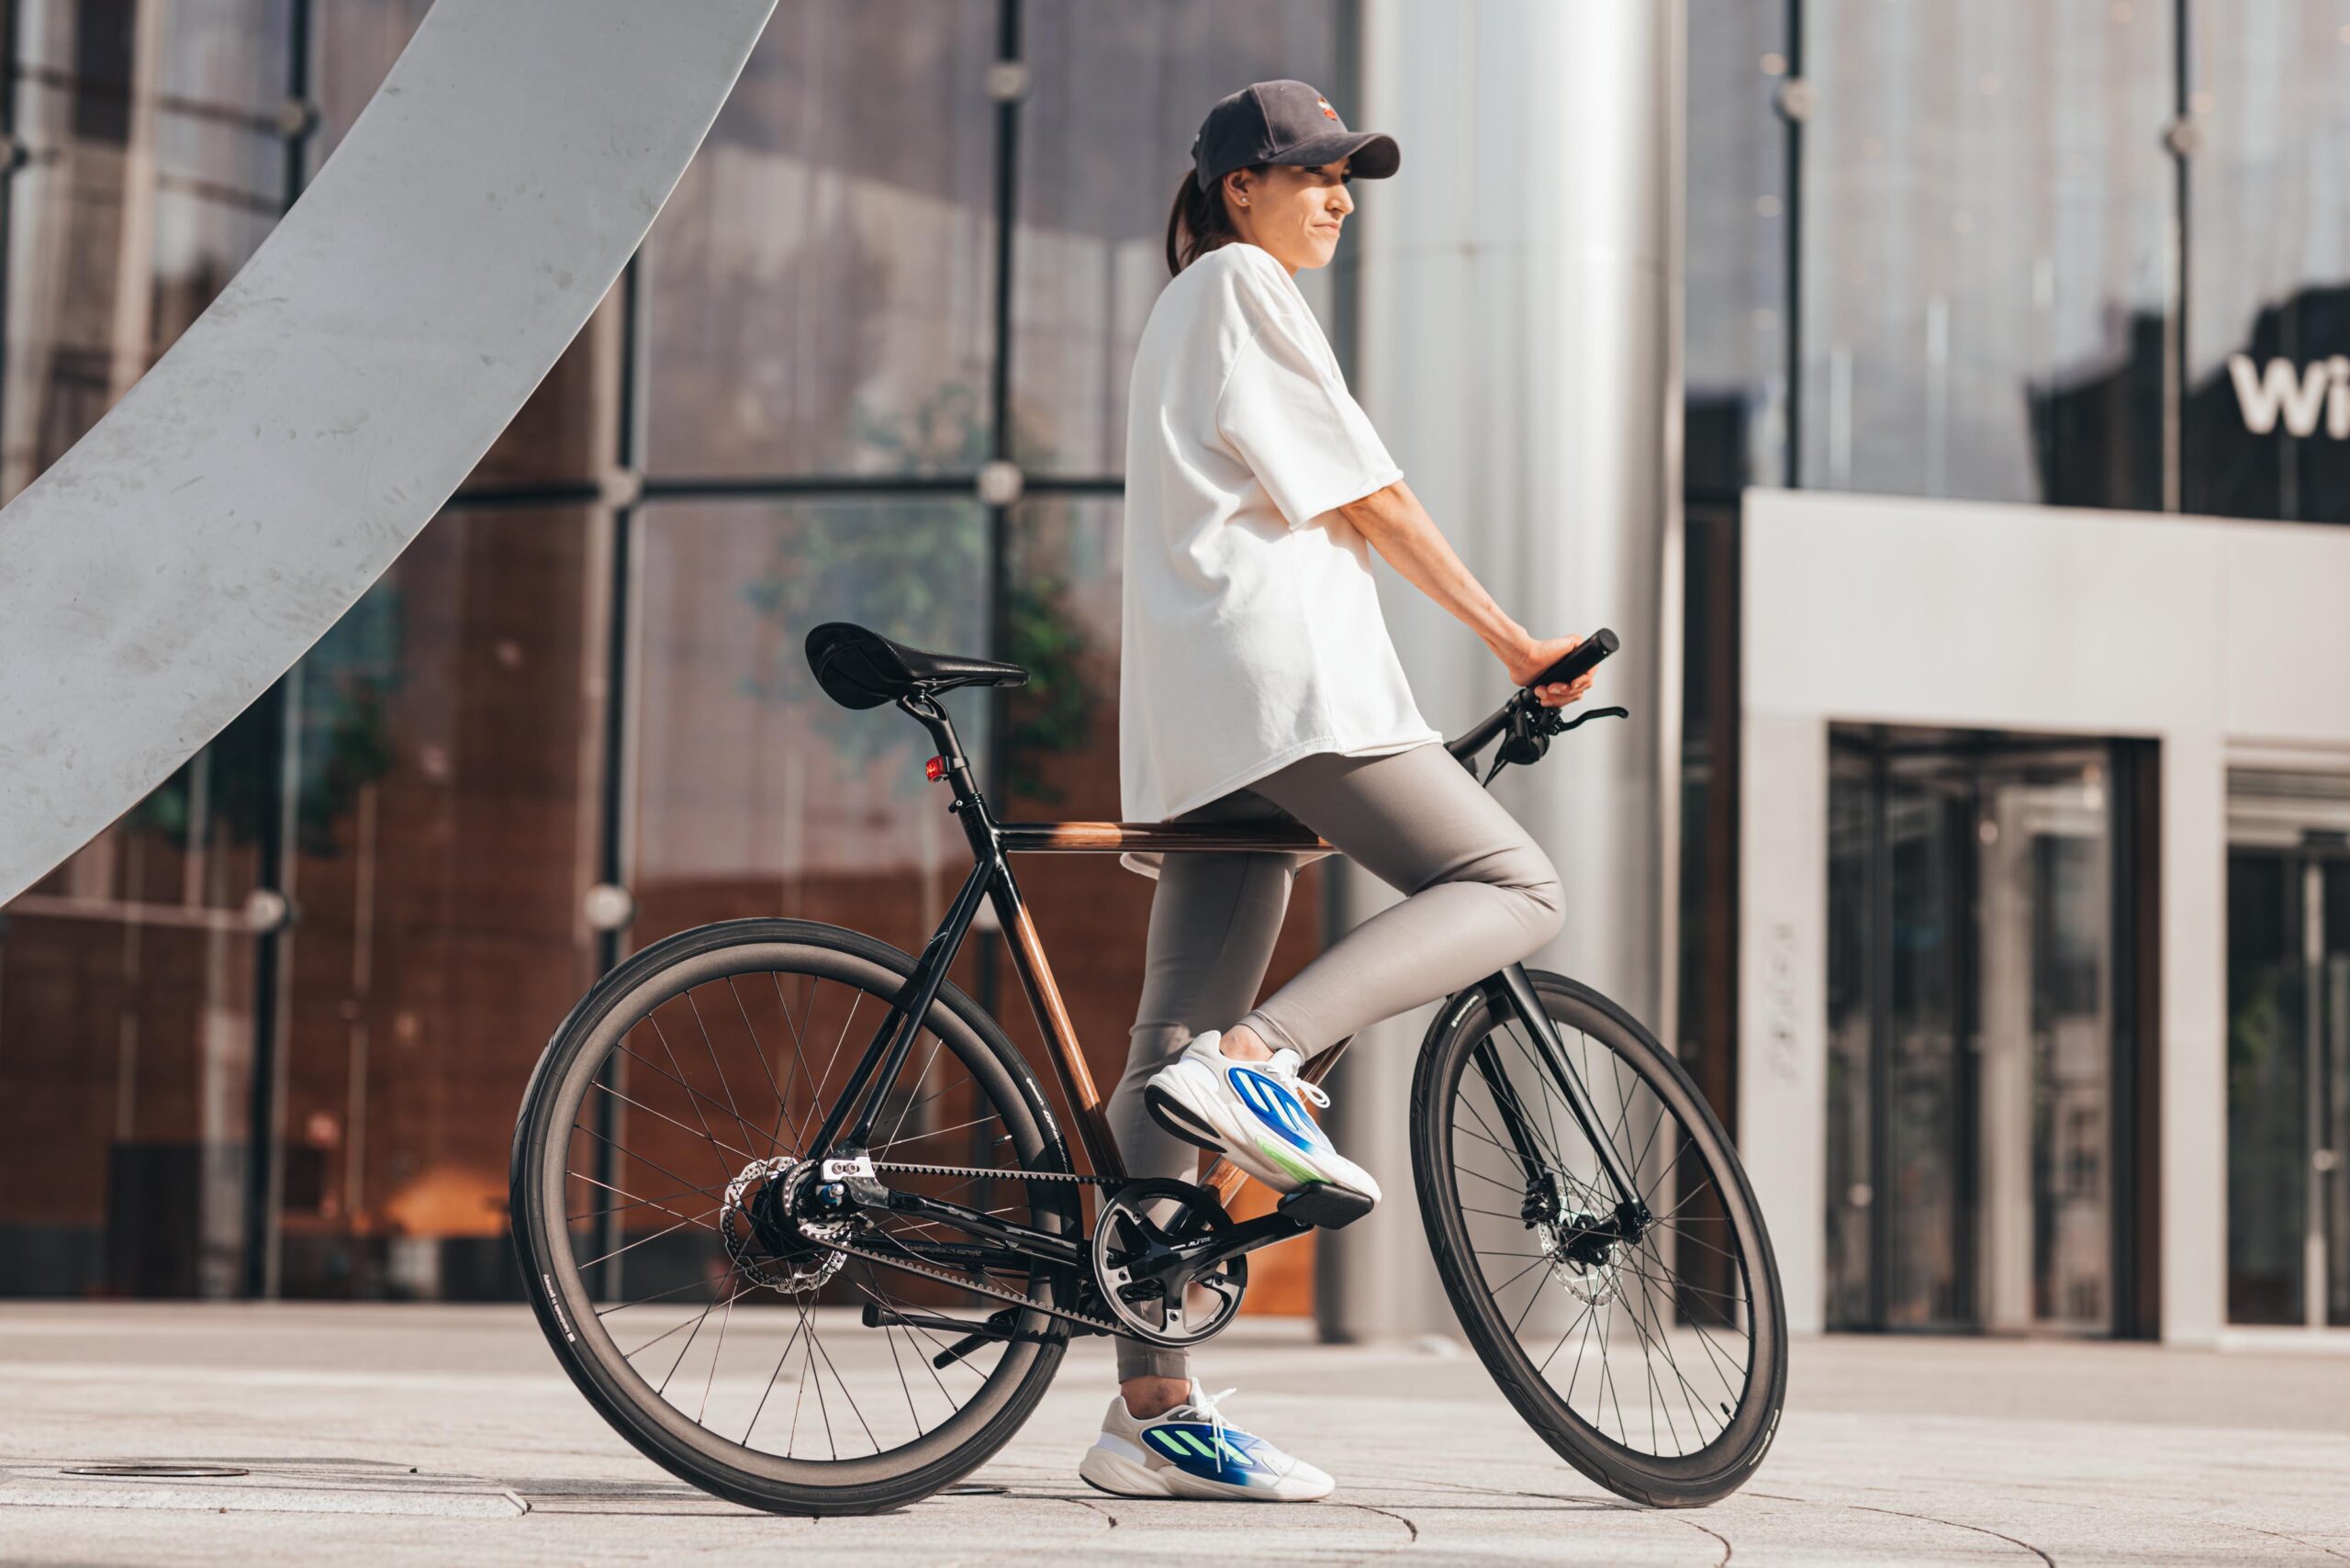 Sporty dressed girl in the middle of a square surrounded by glass walls standing with bicycle with foot on the pedal looking straight ahead. The sun illuminates them. Bicycle with a classic male frame, covered with natural wood.